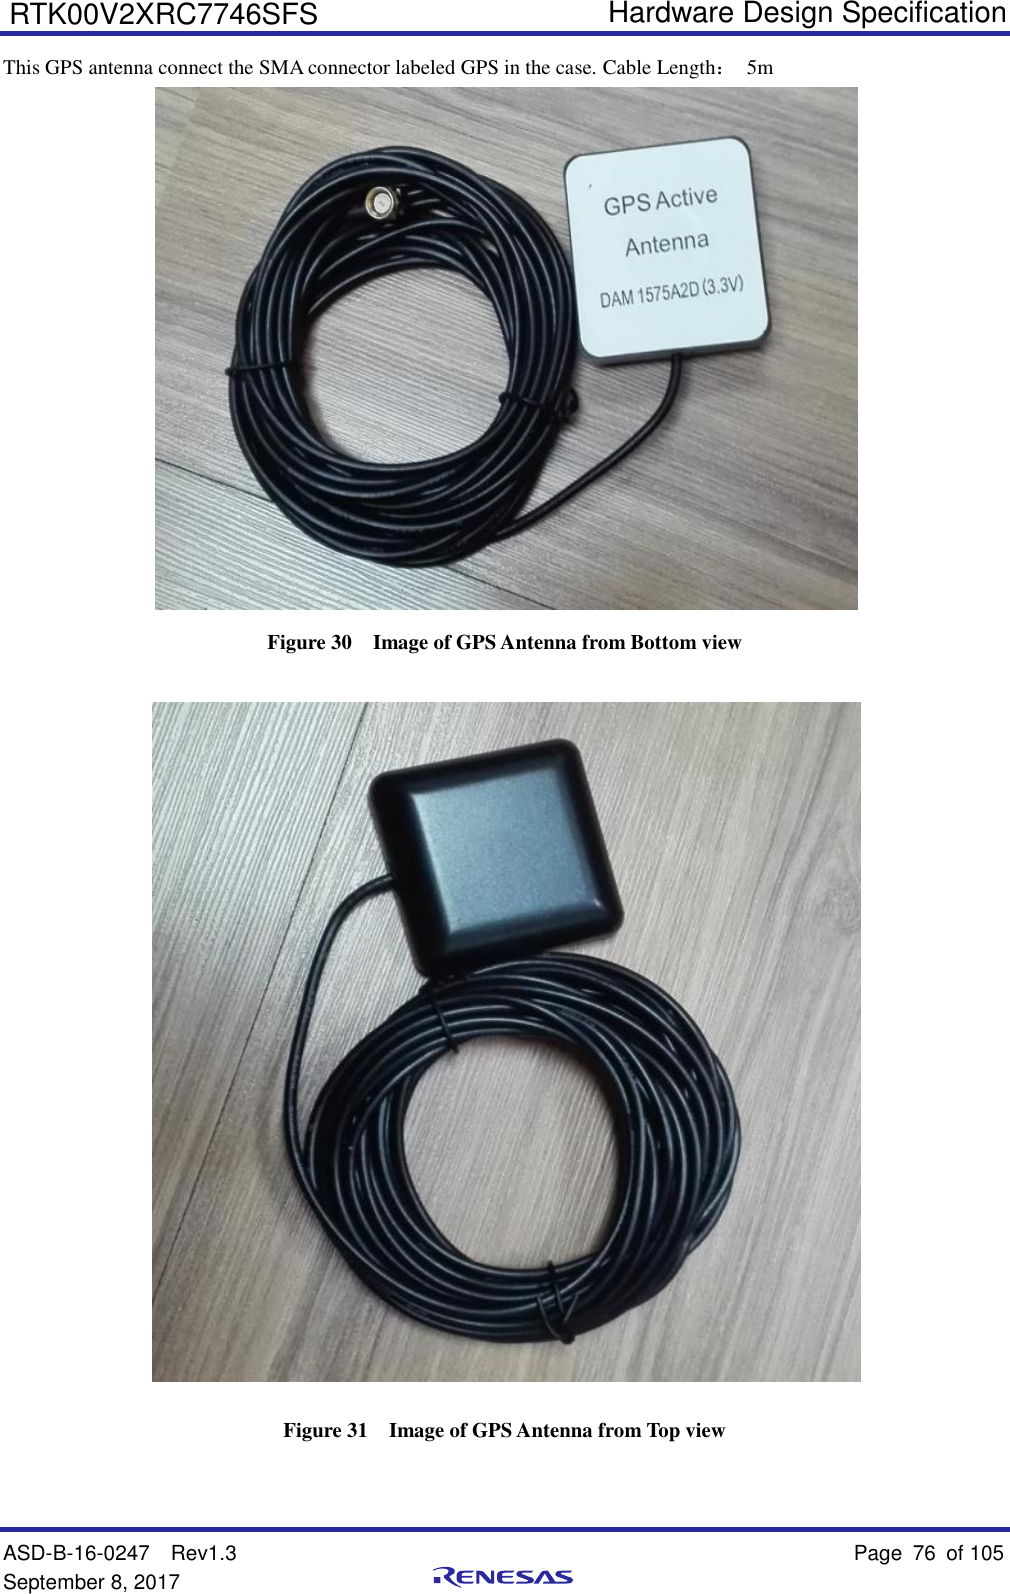   Hardware Design Specification ASD-B-16-0247  Rev1.3    Page 76  of 105 September 8, 2017      RTK00V2XRC7746SFS This GPS antenna connect the SMA connector labeled GPS in the case. Cable Length： 5m  Figure 30  Image of GPS Antenna from Bottom view  Figure 31  Image of GPS Antenna from Top view 